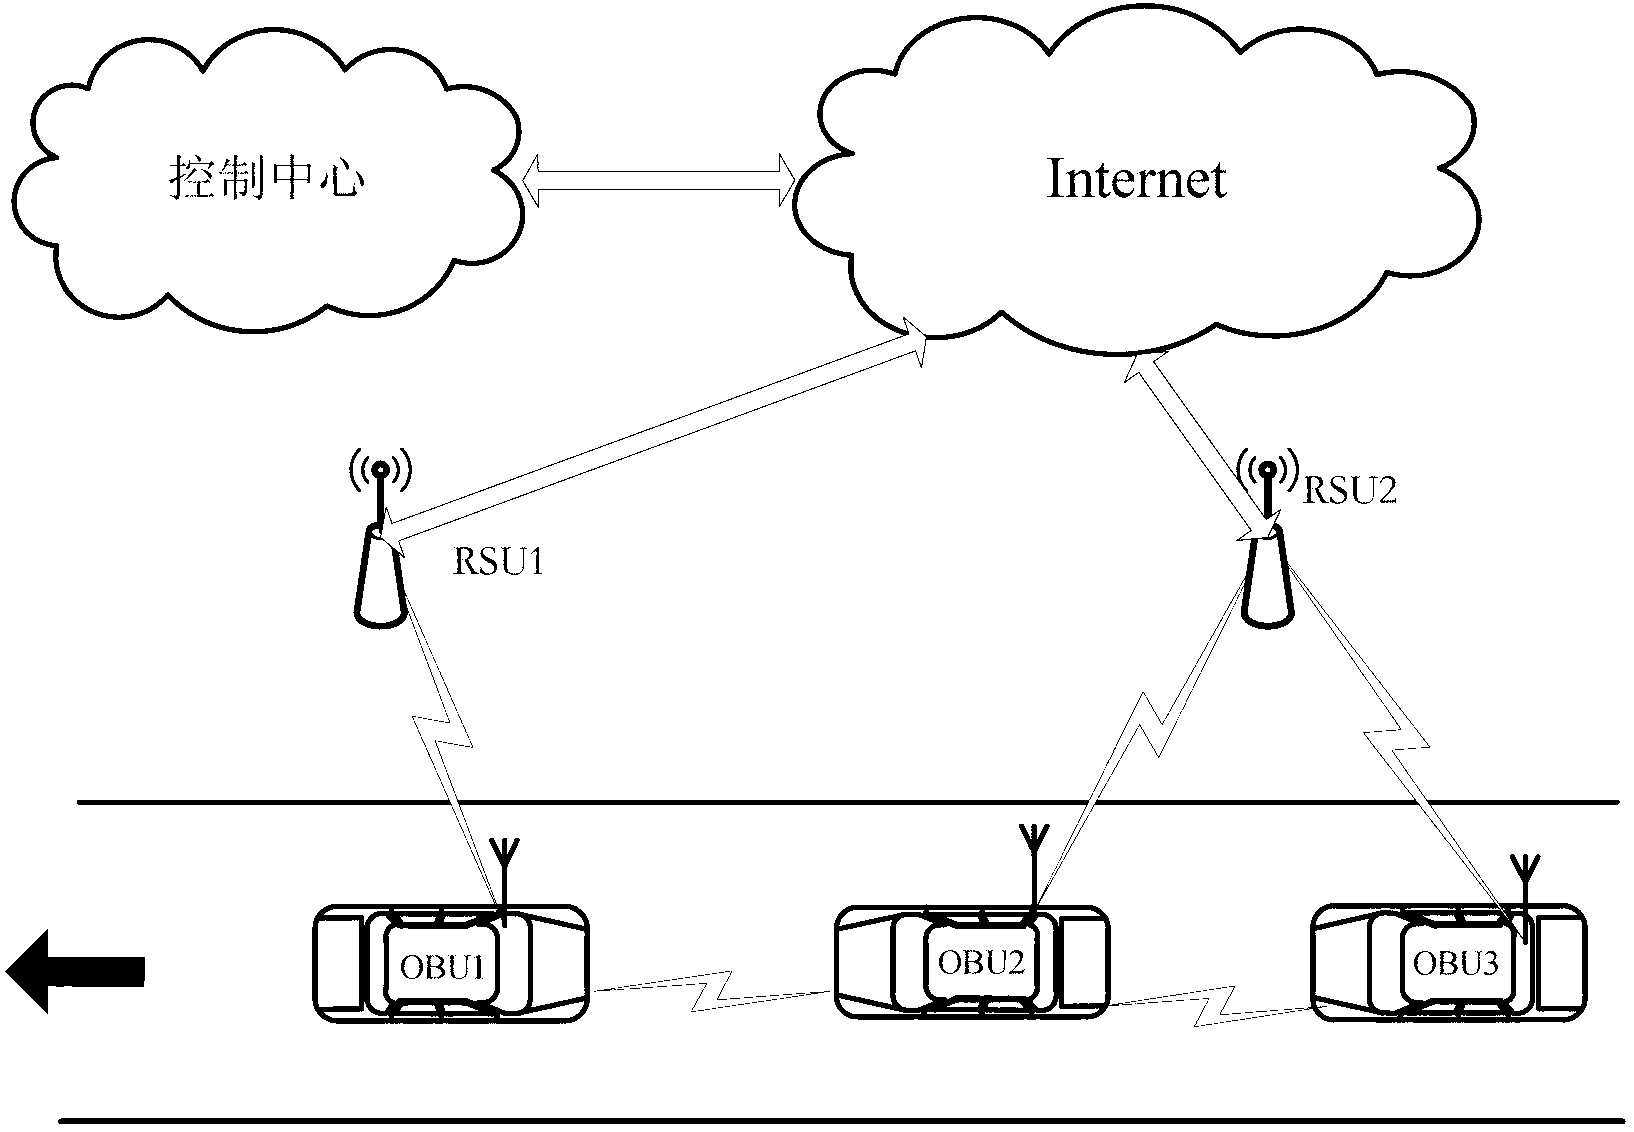 Communication method based on WLAN access control mechanism and application